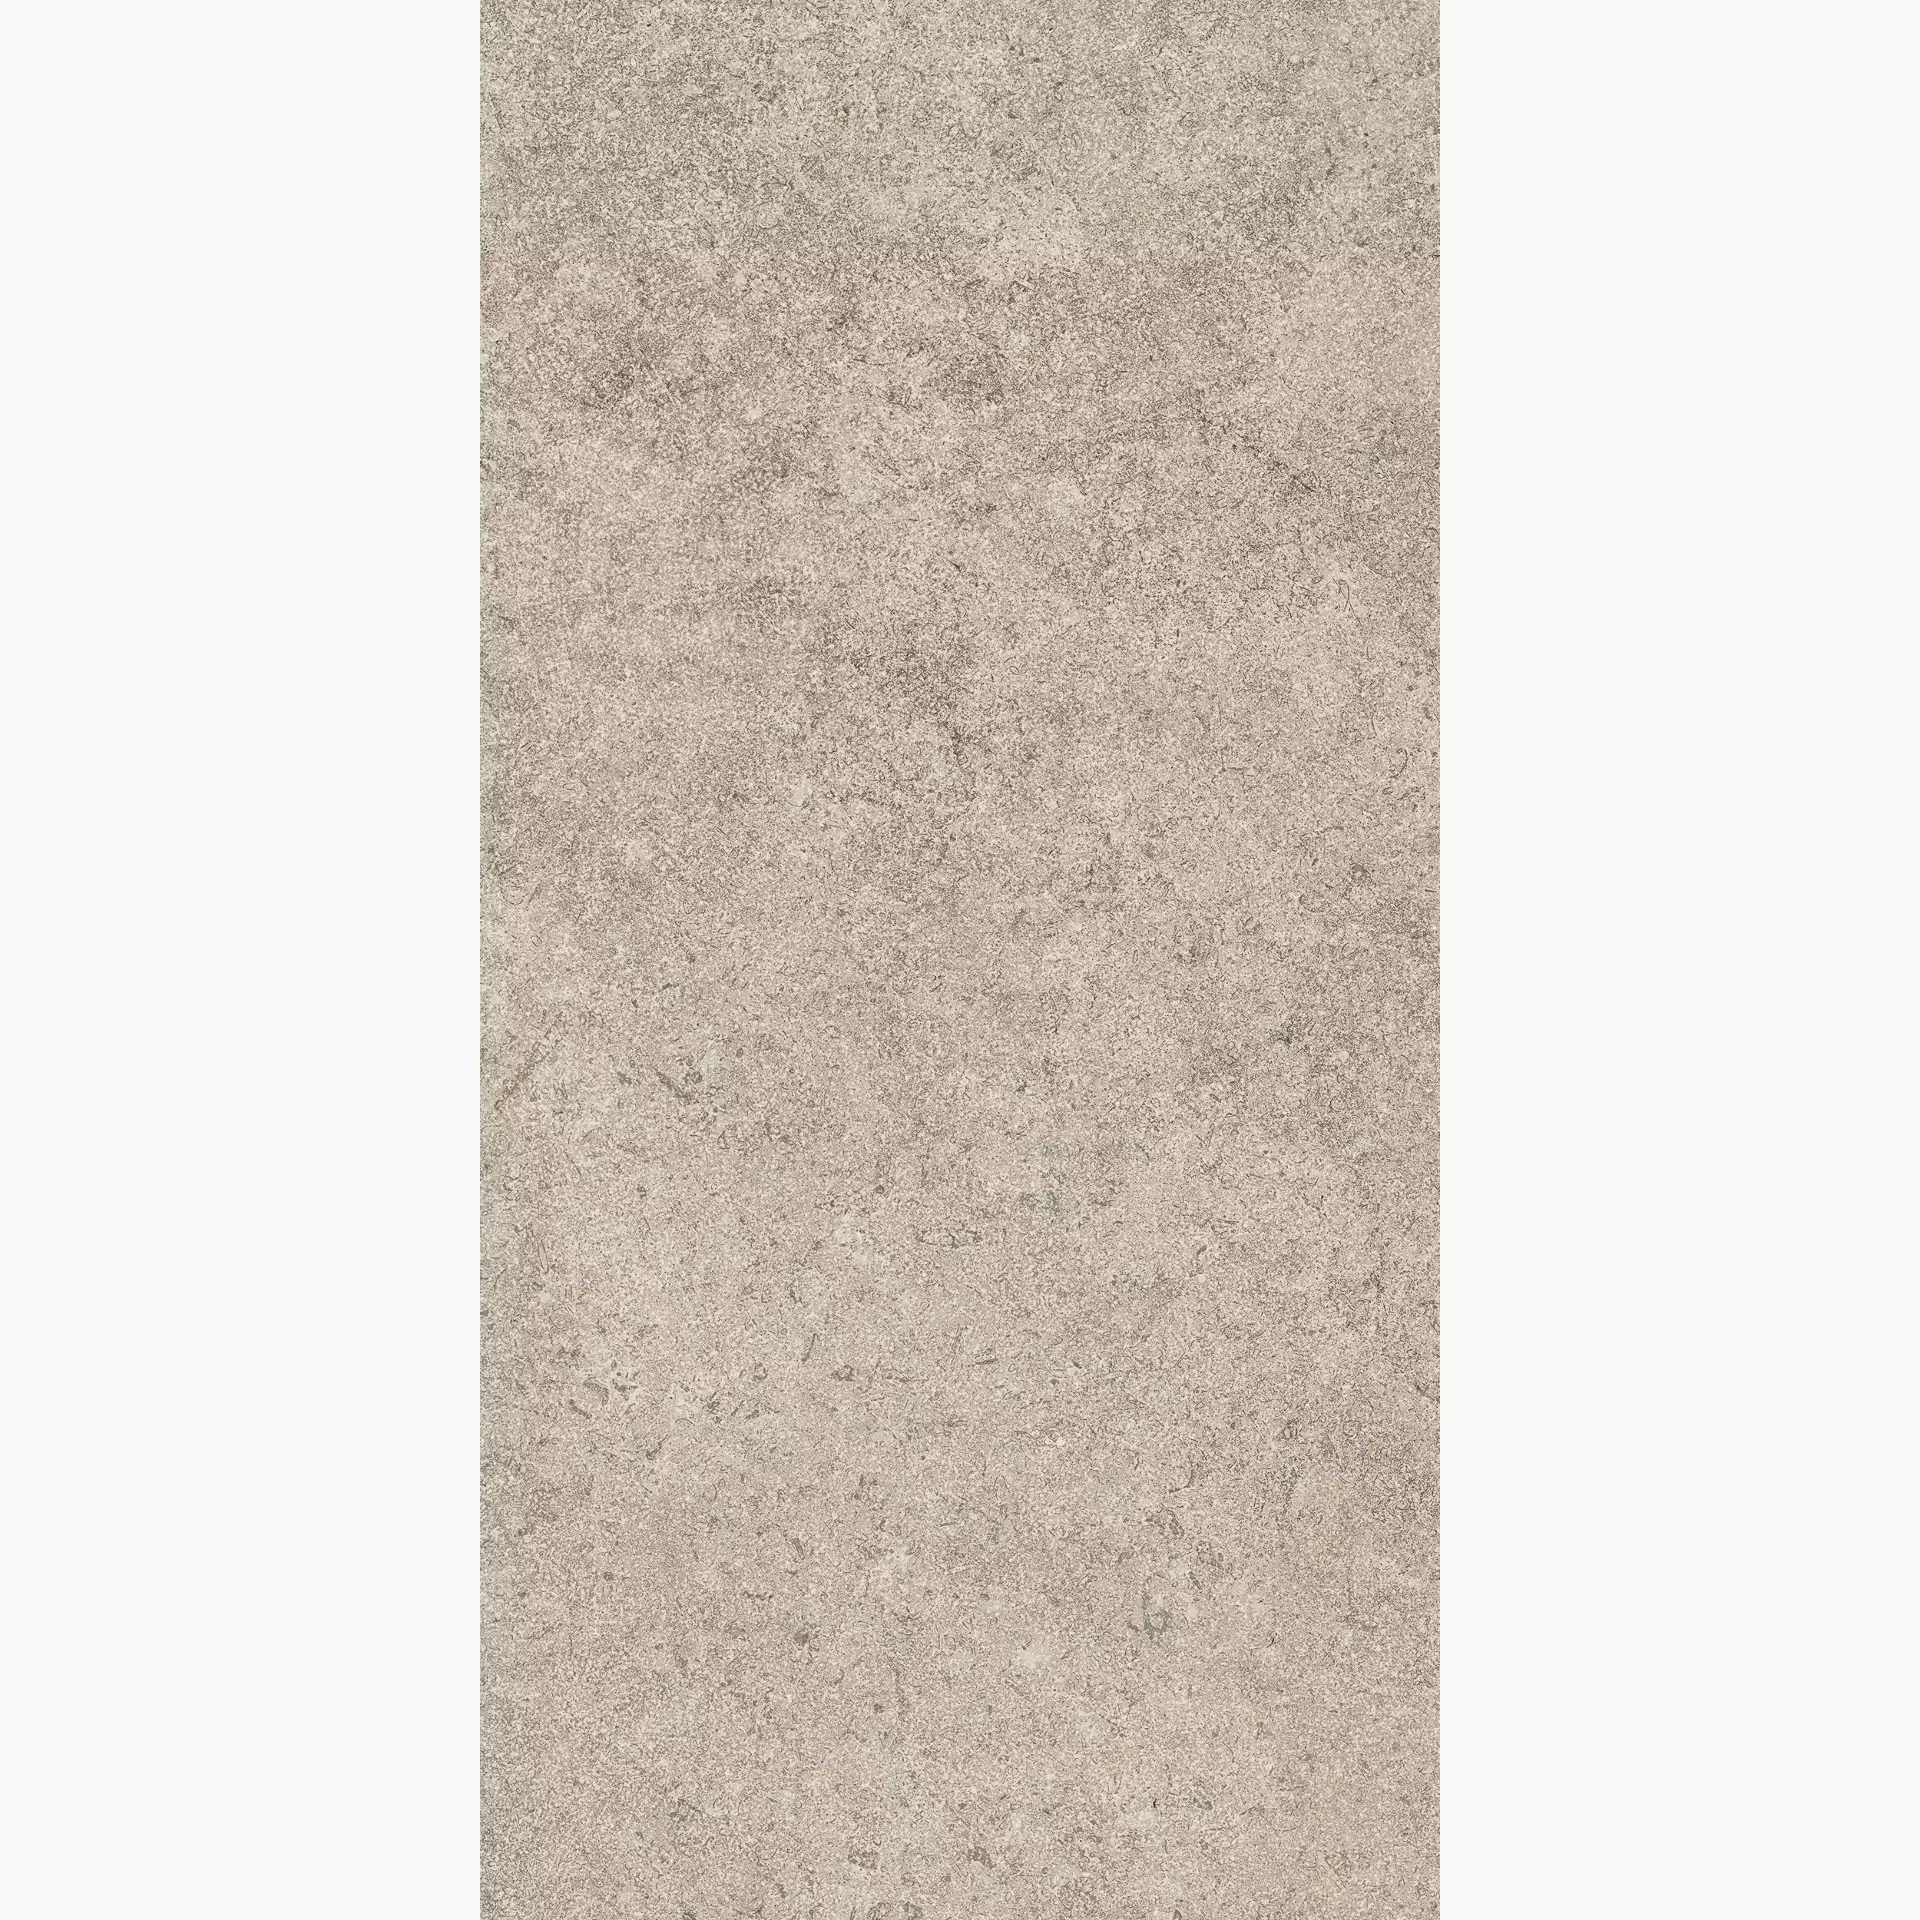 Cottodeste Pura Sand Rolled Protect EG-PR35 30x60cm rectified 14mm